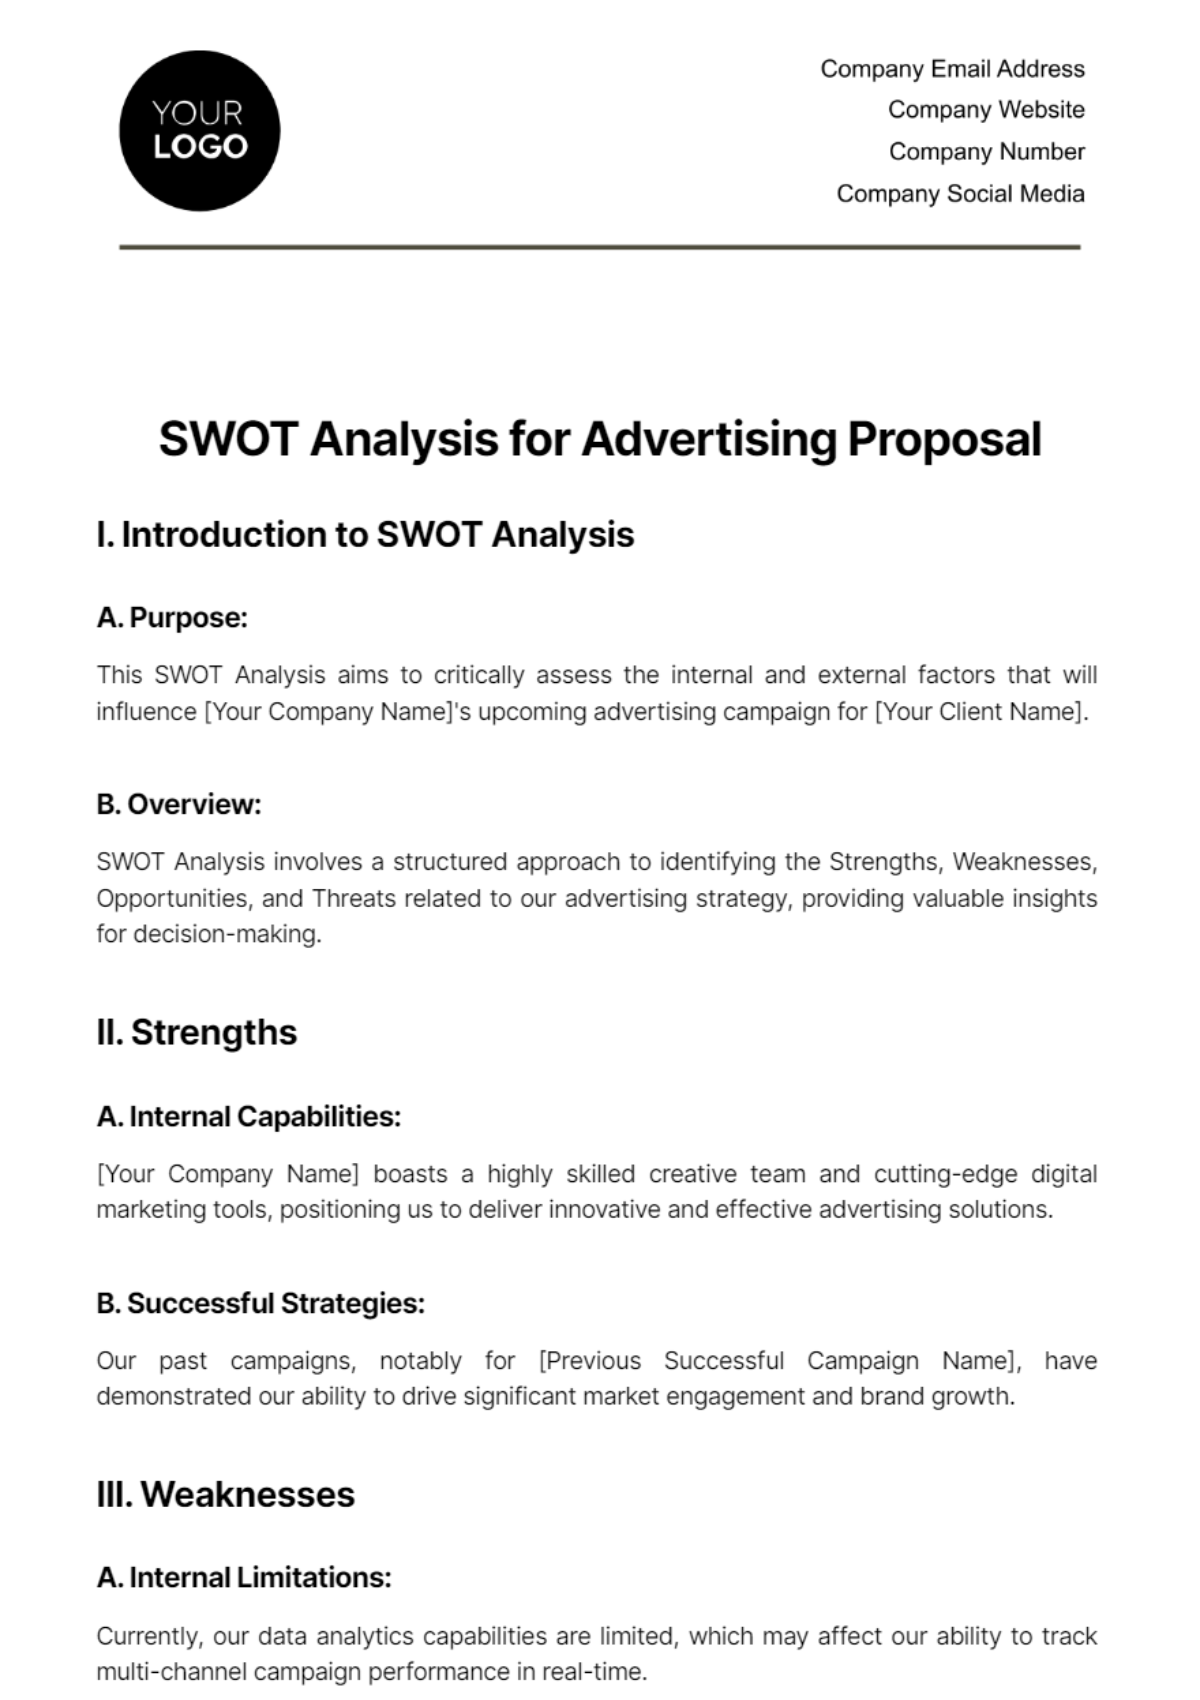 Free SWOT Analysis for Advertising Proposal Template